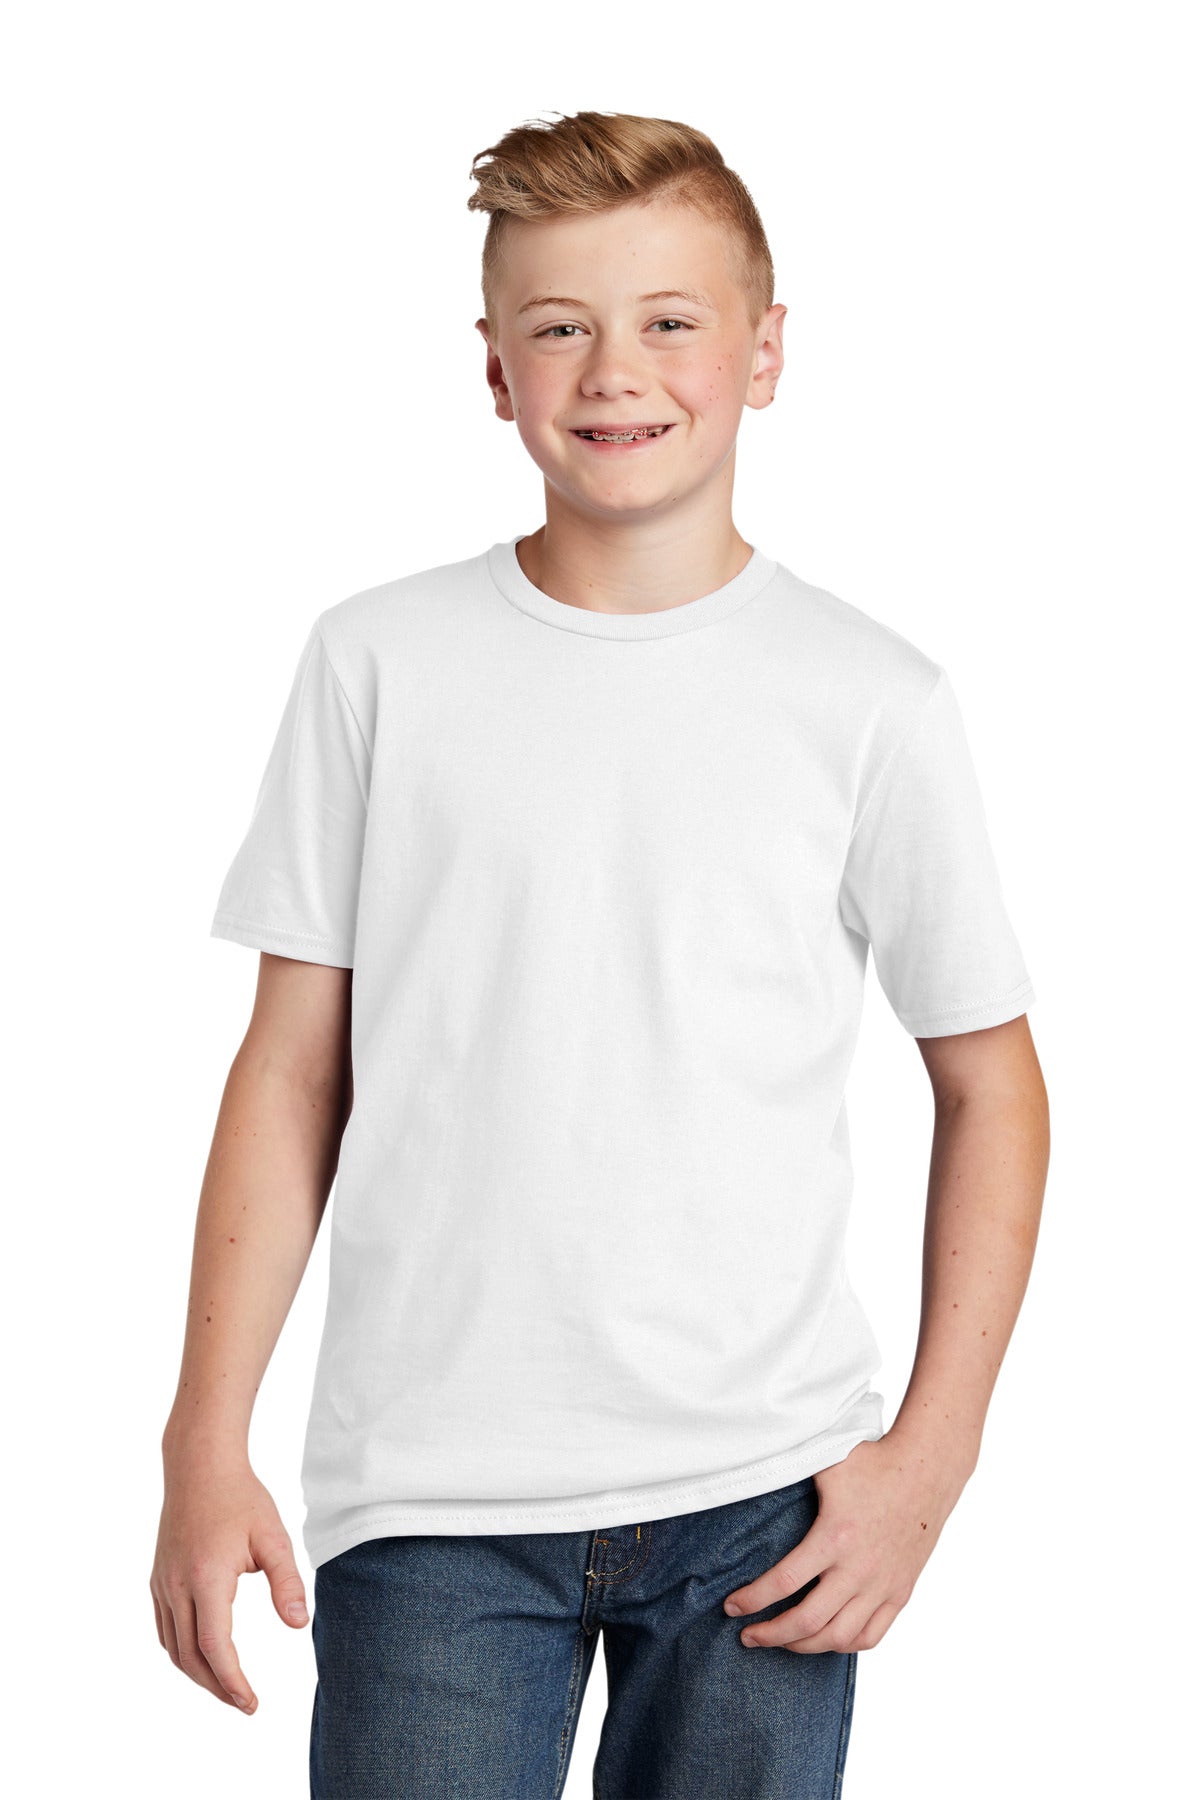 District® Youth Very Important Tee®. DT6000Y - DFW Impression